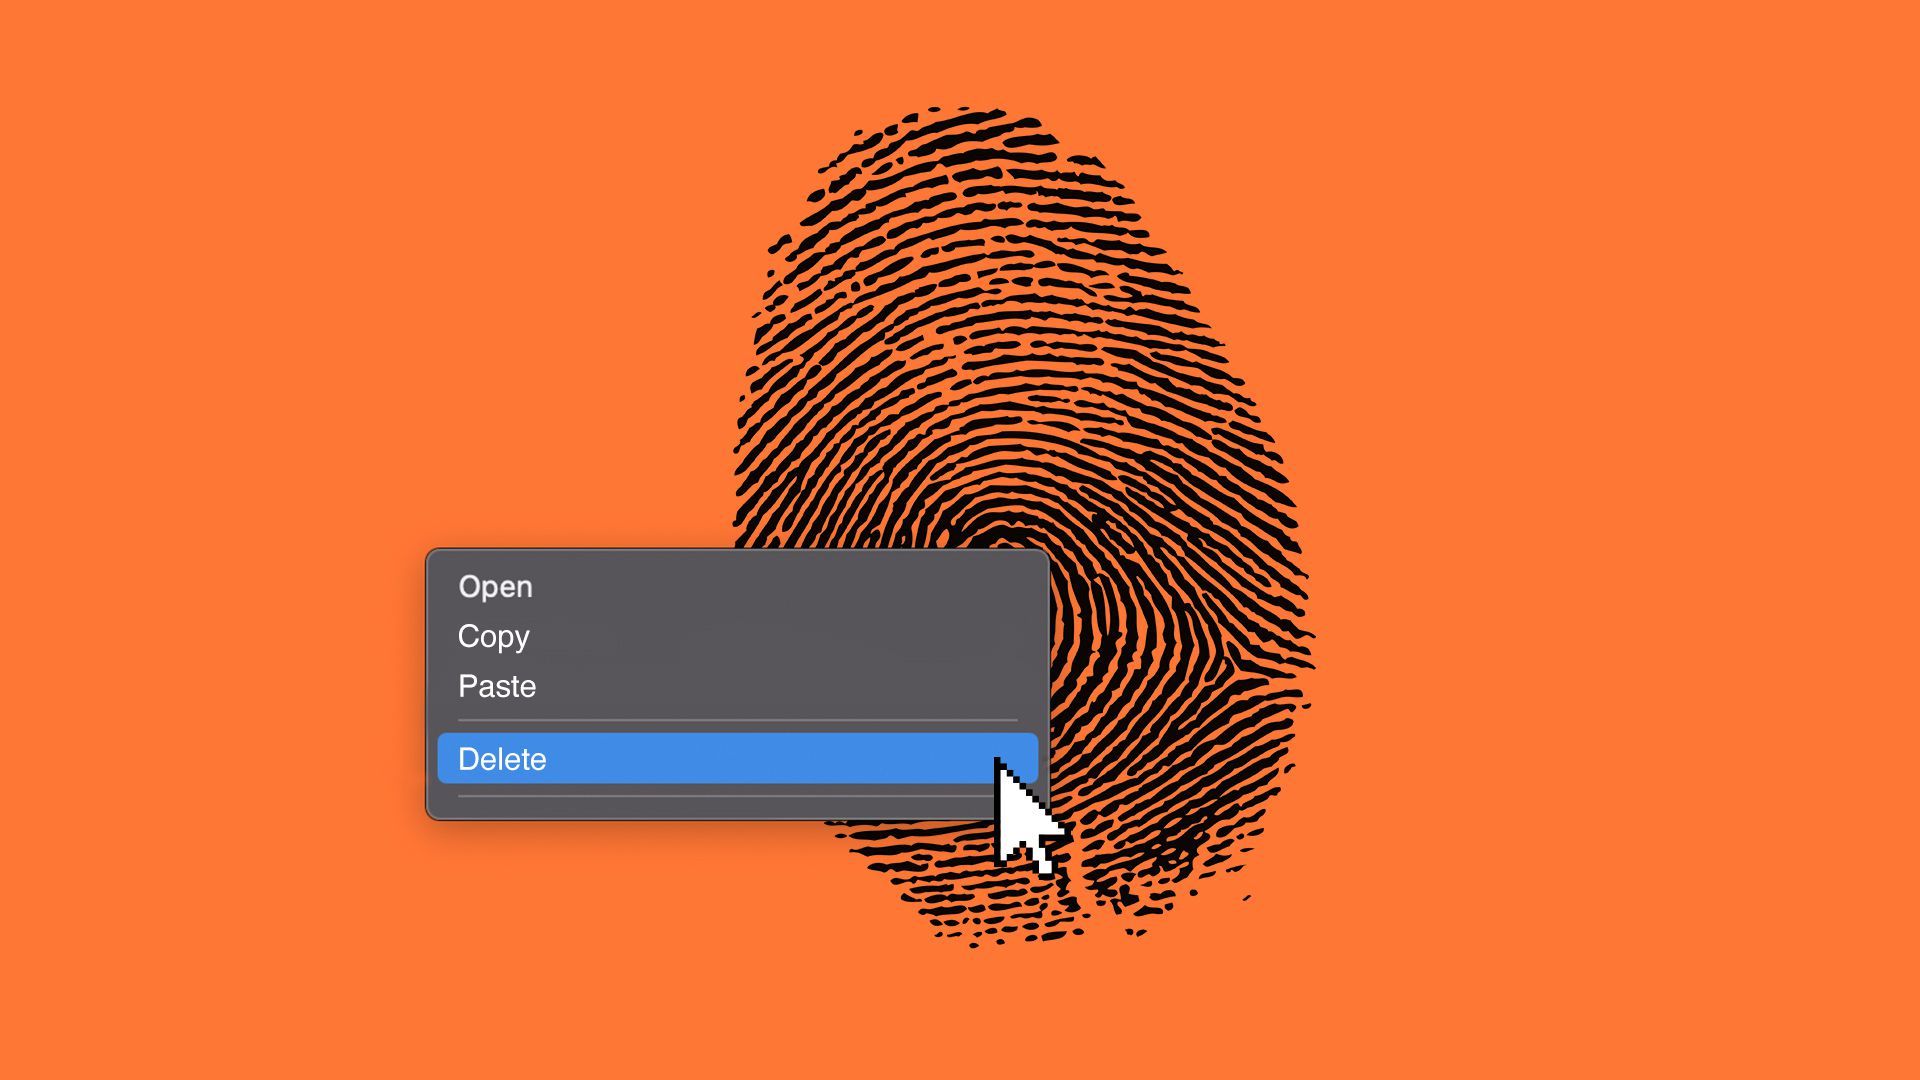 Illustration of a cursor hovering over a fingerprint, about to click "Delete" from a drop down menu.